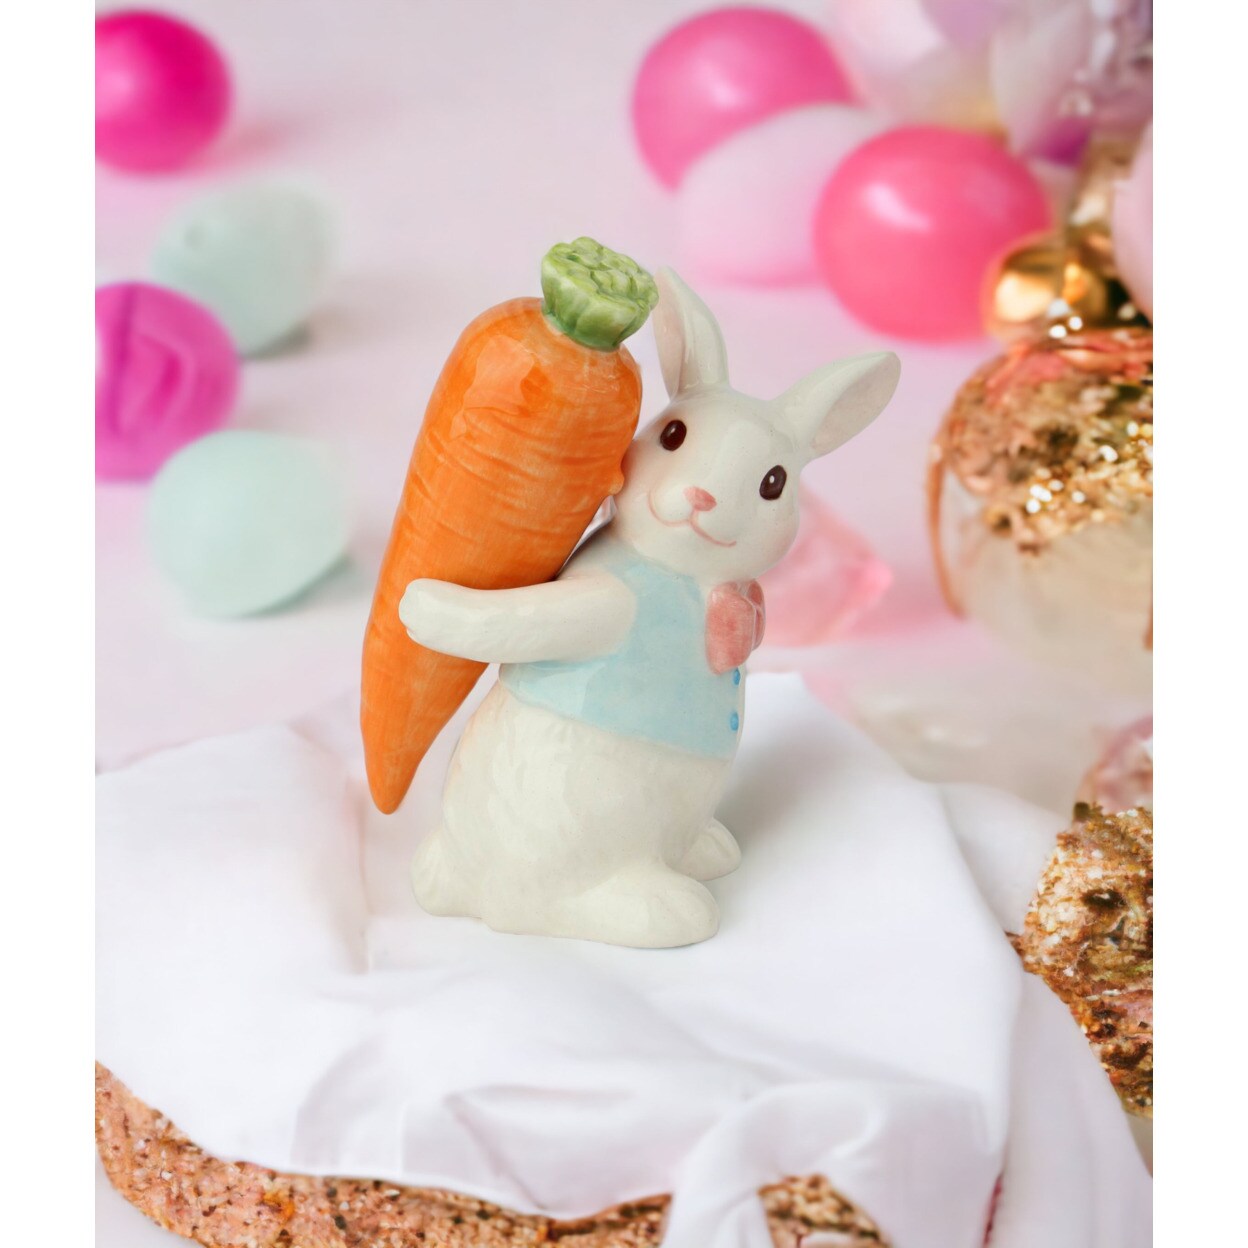 kevinsgiftshoppe Ceramic Easter Bunny Rabbit Carrying Carrot Stick Salt and Pepper Shakers   Kitchen Decor Spring Decor